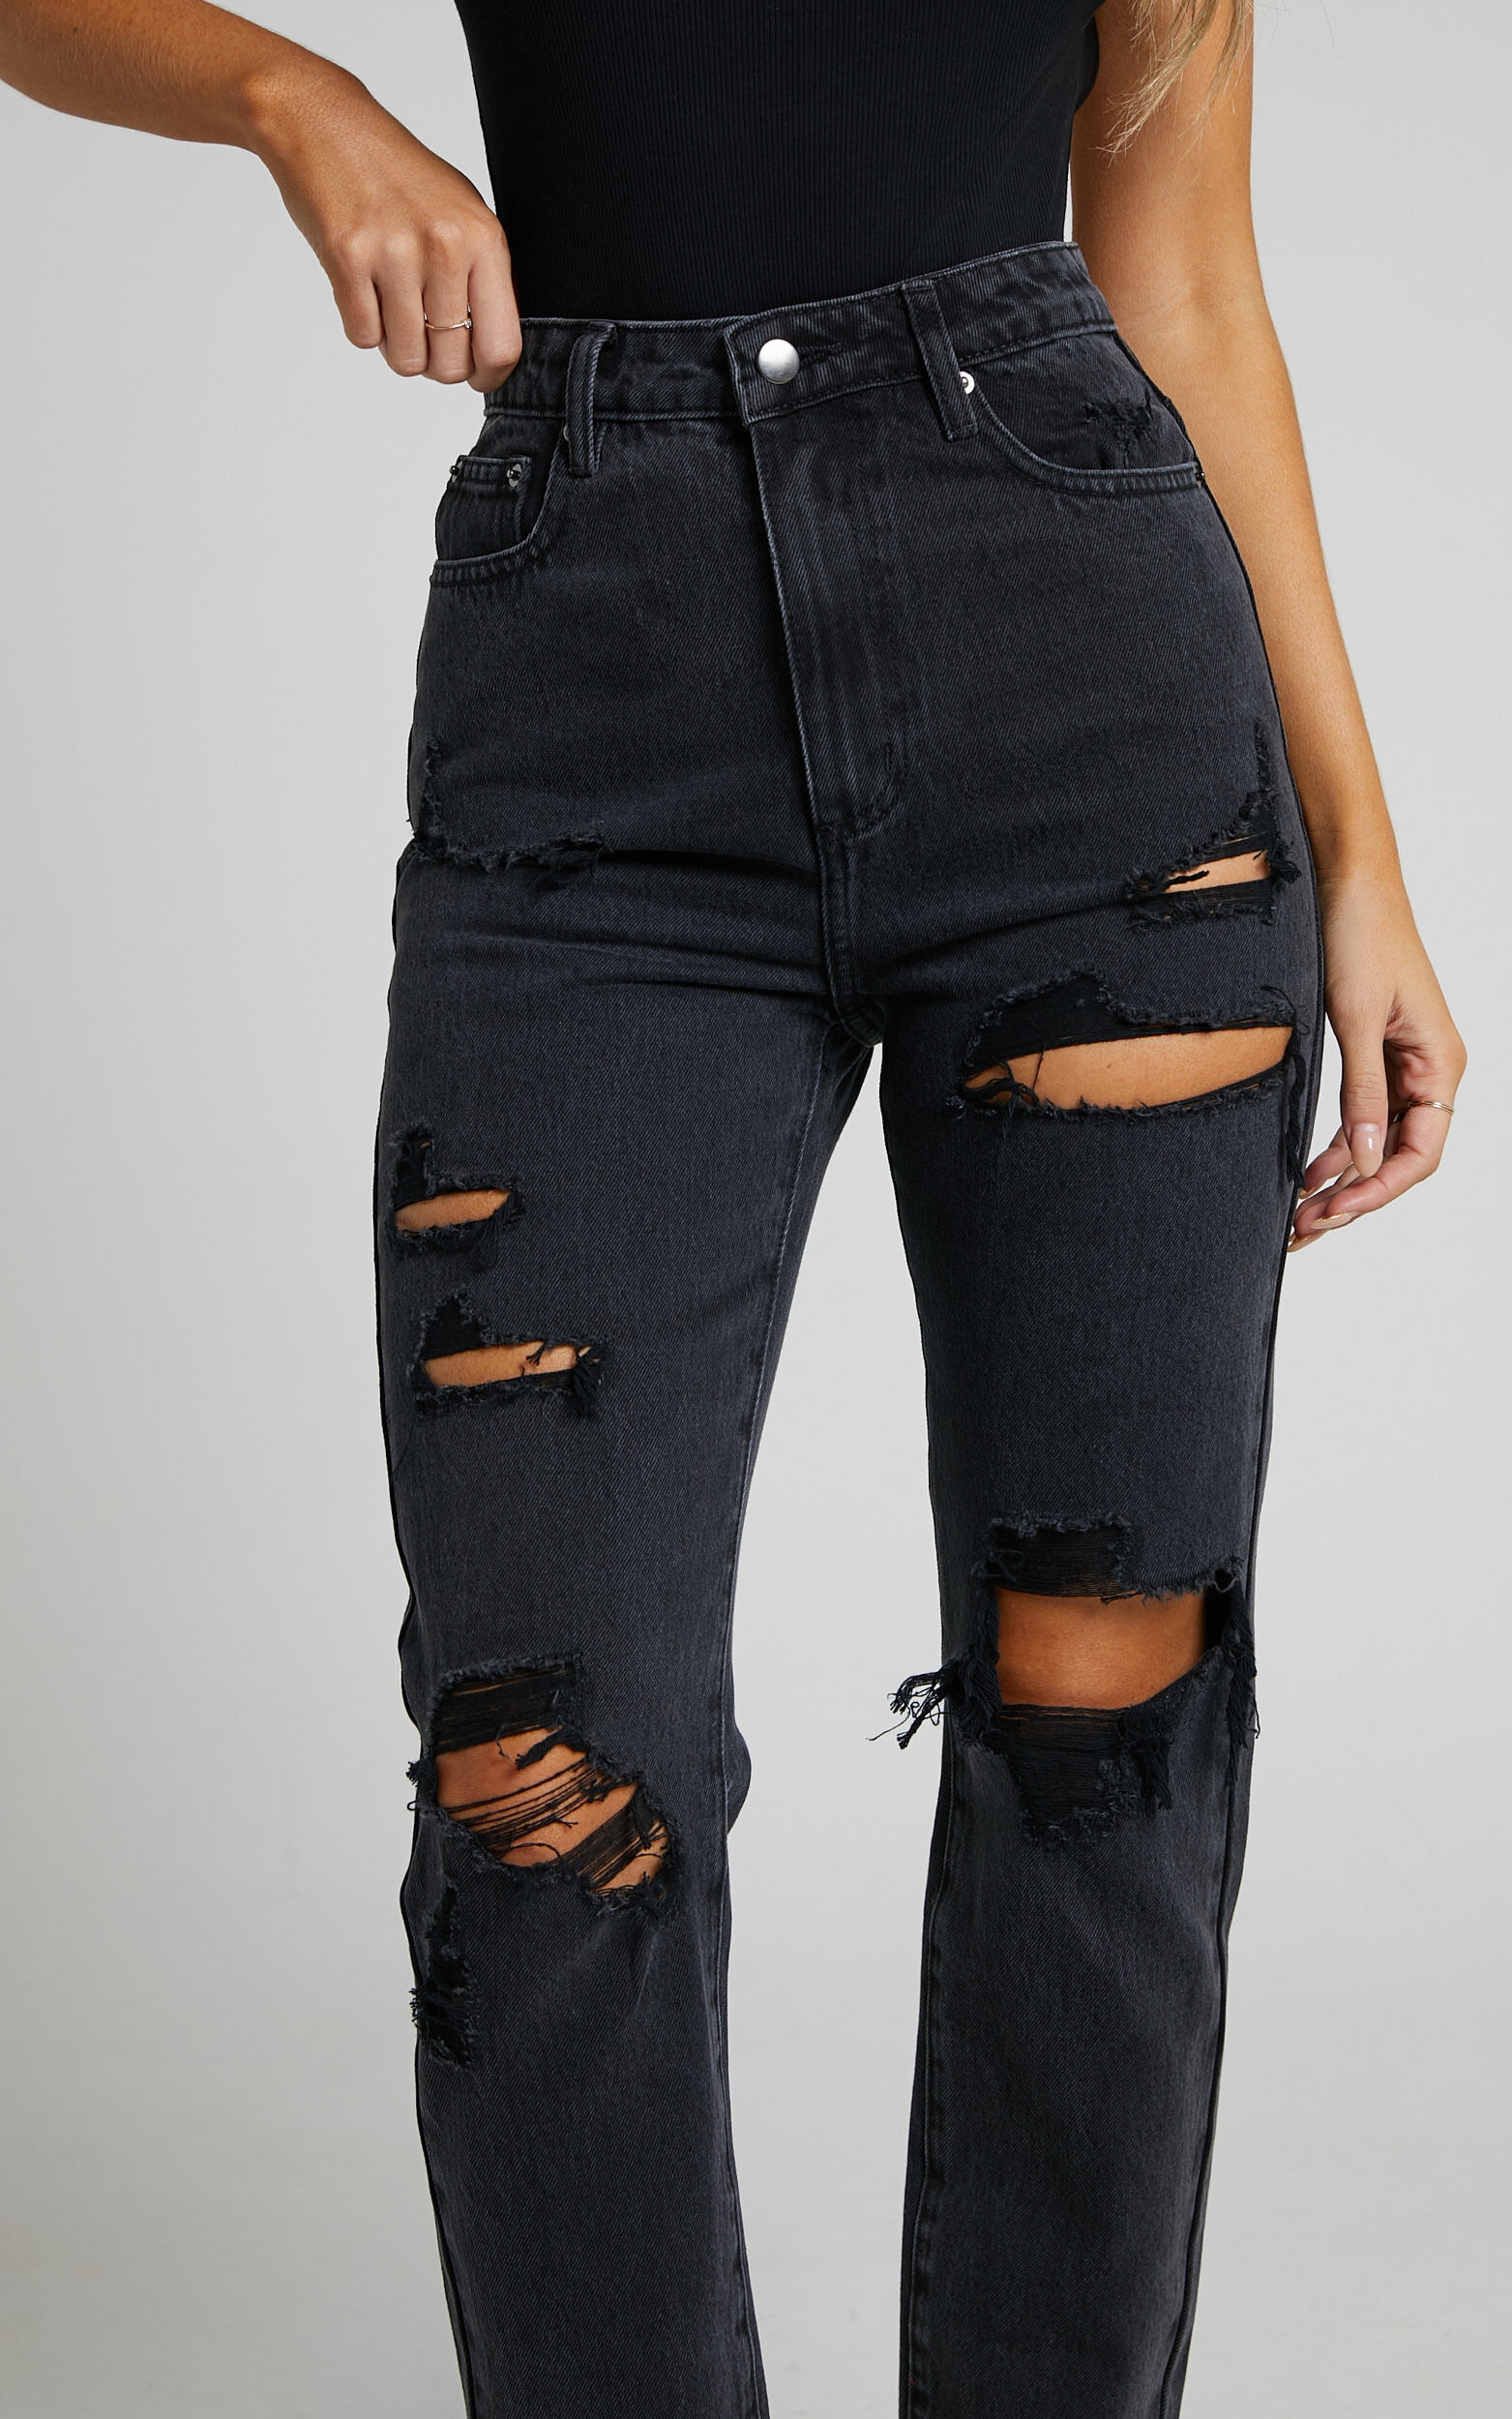 Billie Jeans - High Waisted Recycled Cotton Distressed Mom Jeans in ...